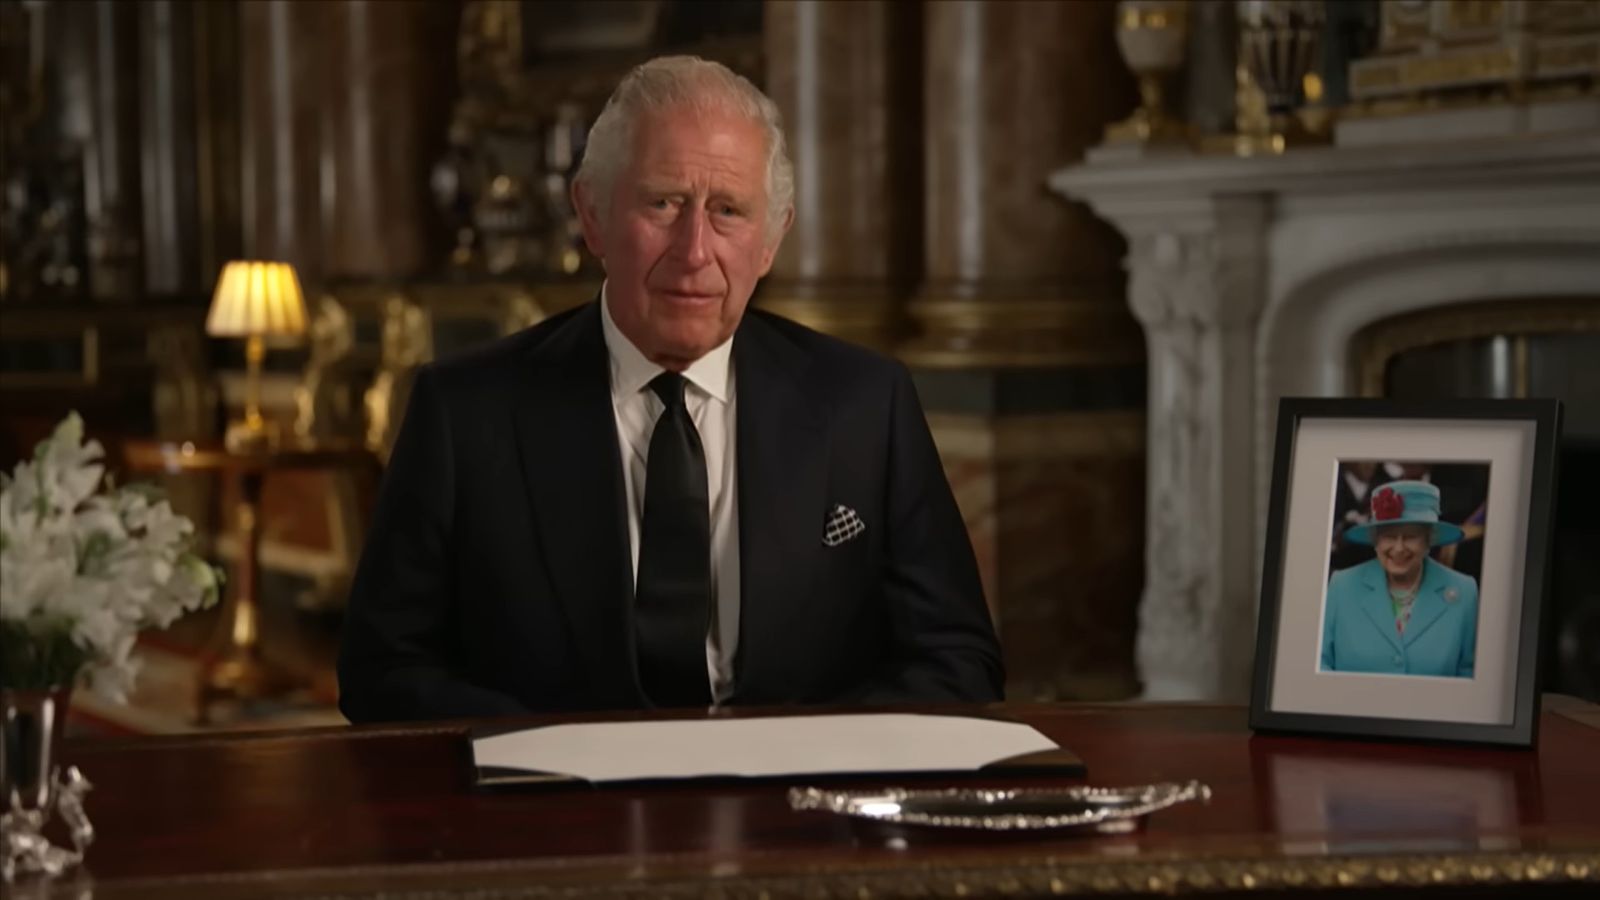 king-charles-iii-former-home-clarence-house-will-be-closed-down-following-his-ascension-to-the-throne-palace-staffers-aides-will-reportedly-lose-their-jobs-but-receive-increased-redundancy-pay